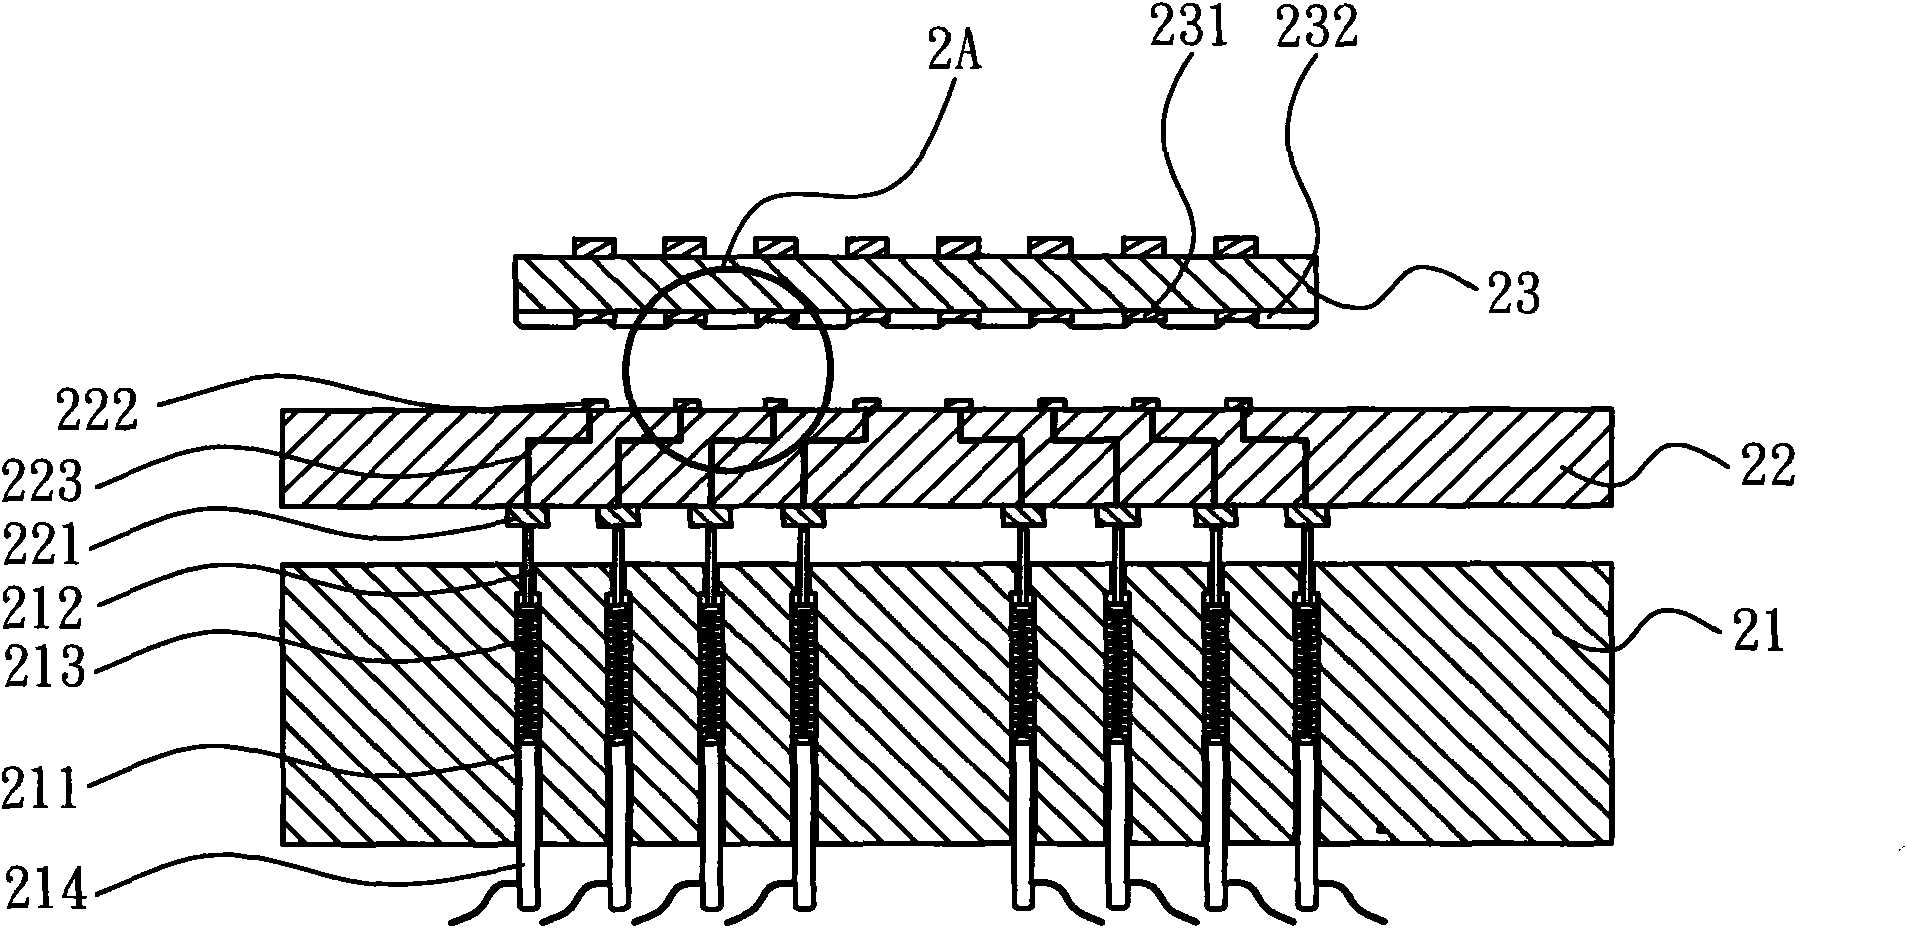 Electrical test adapter plate of sealing base plate and method thereof